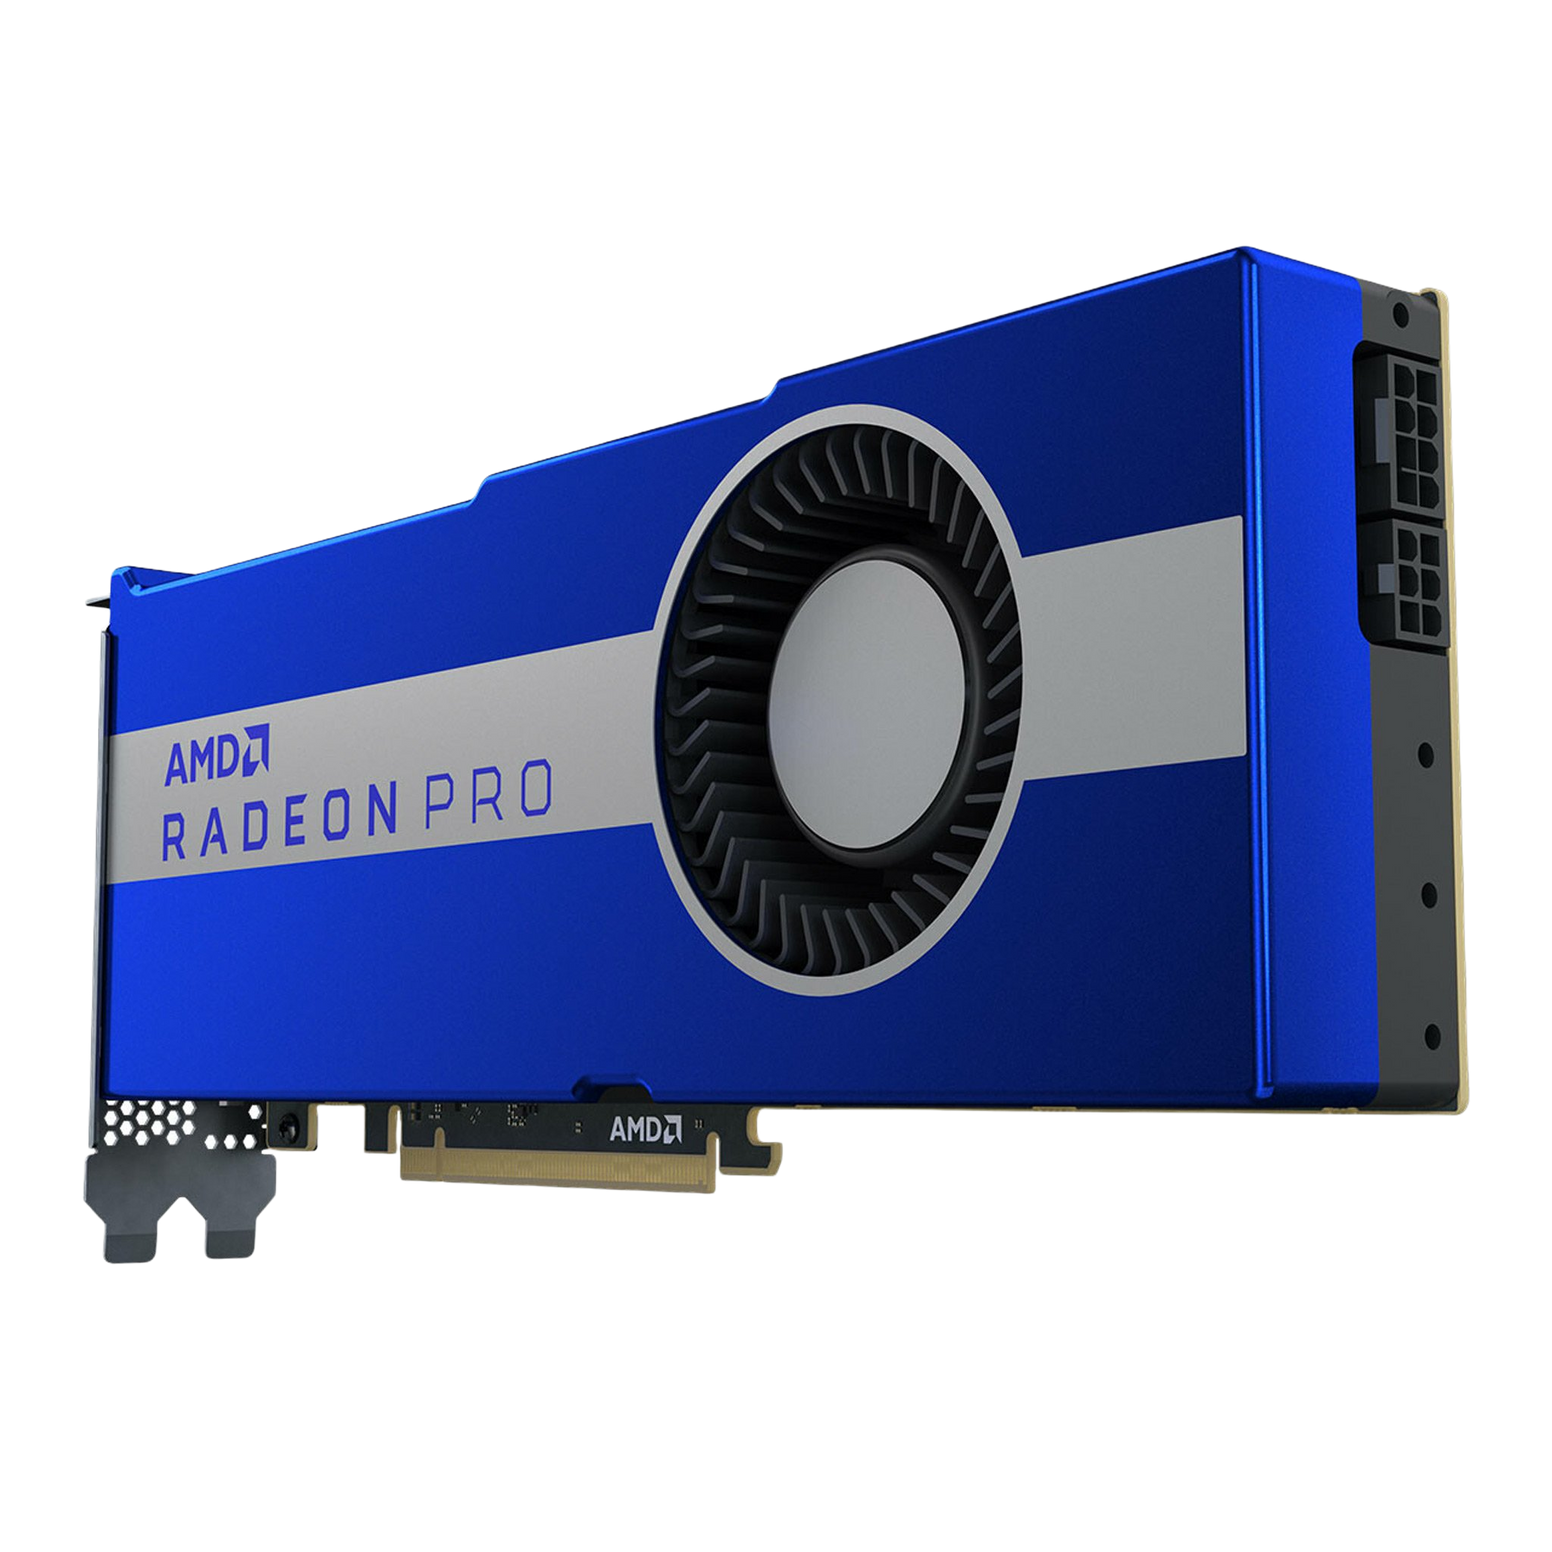 AMD Radeon Pro W5700 8GB 7nm Graphics Card - Not available due to GPU shortage - Discontinued